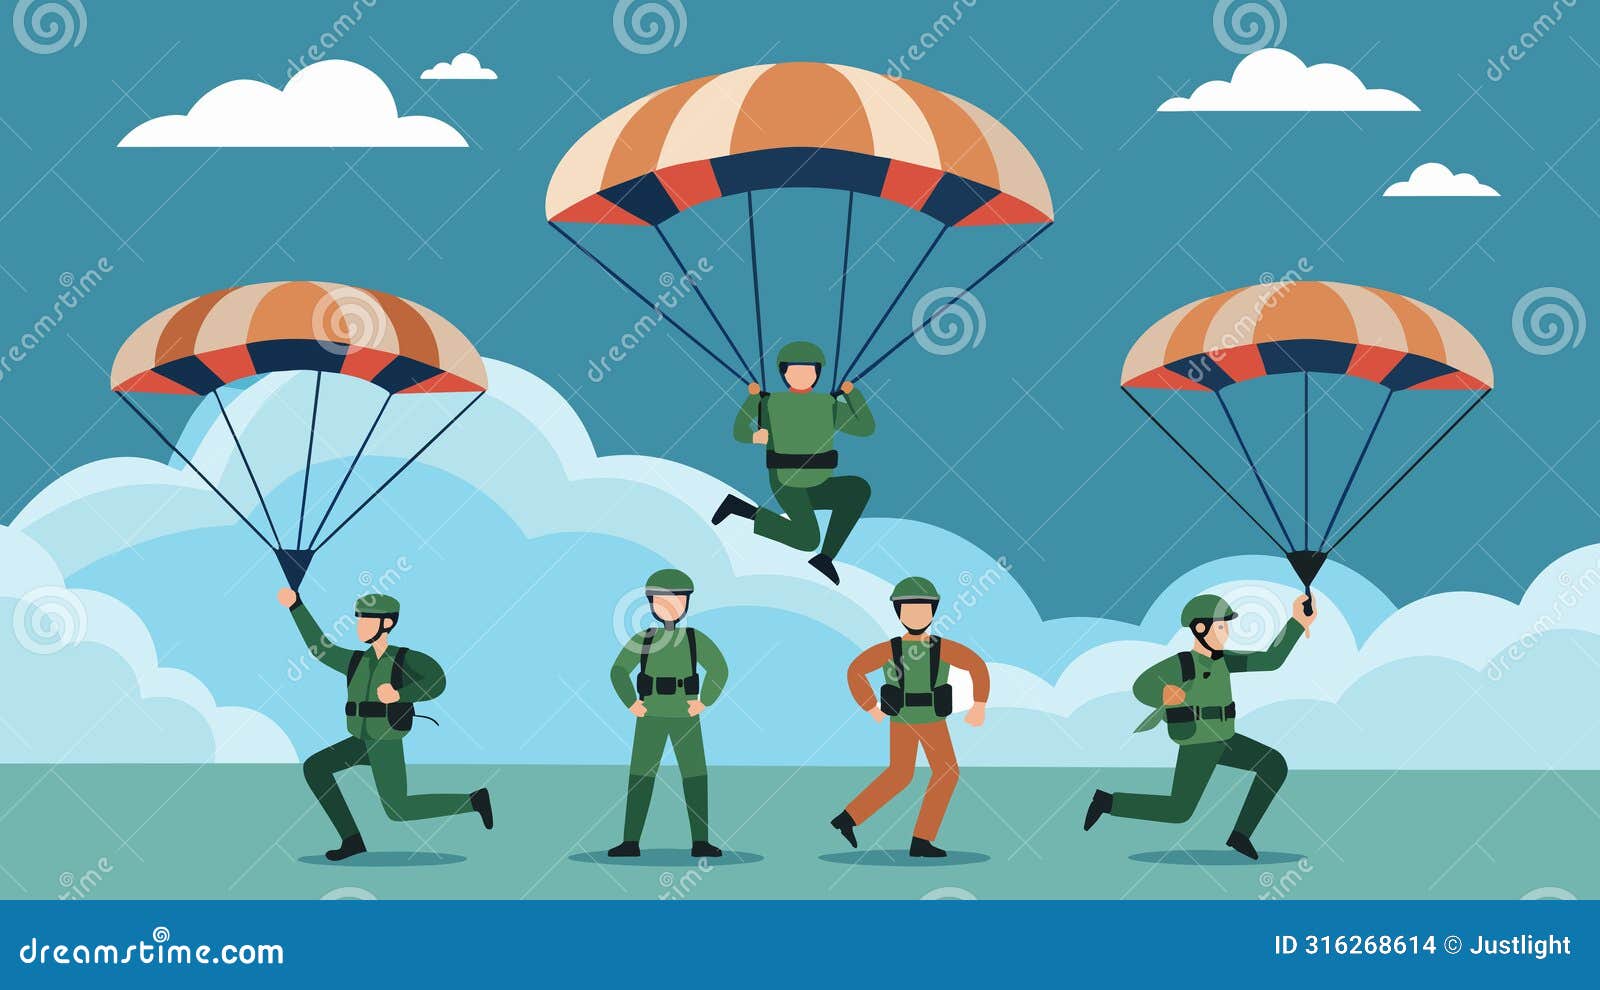 a thrilling parachuting demonstration by the elite paratroopers of the base showing off their expert skills and